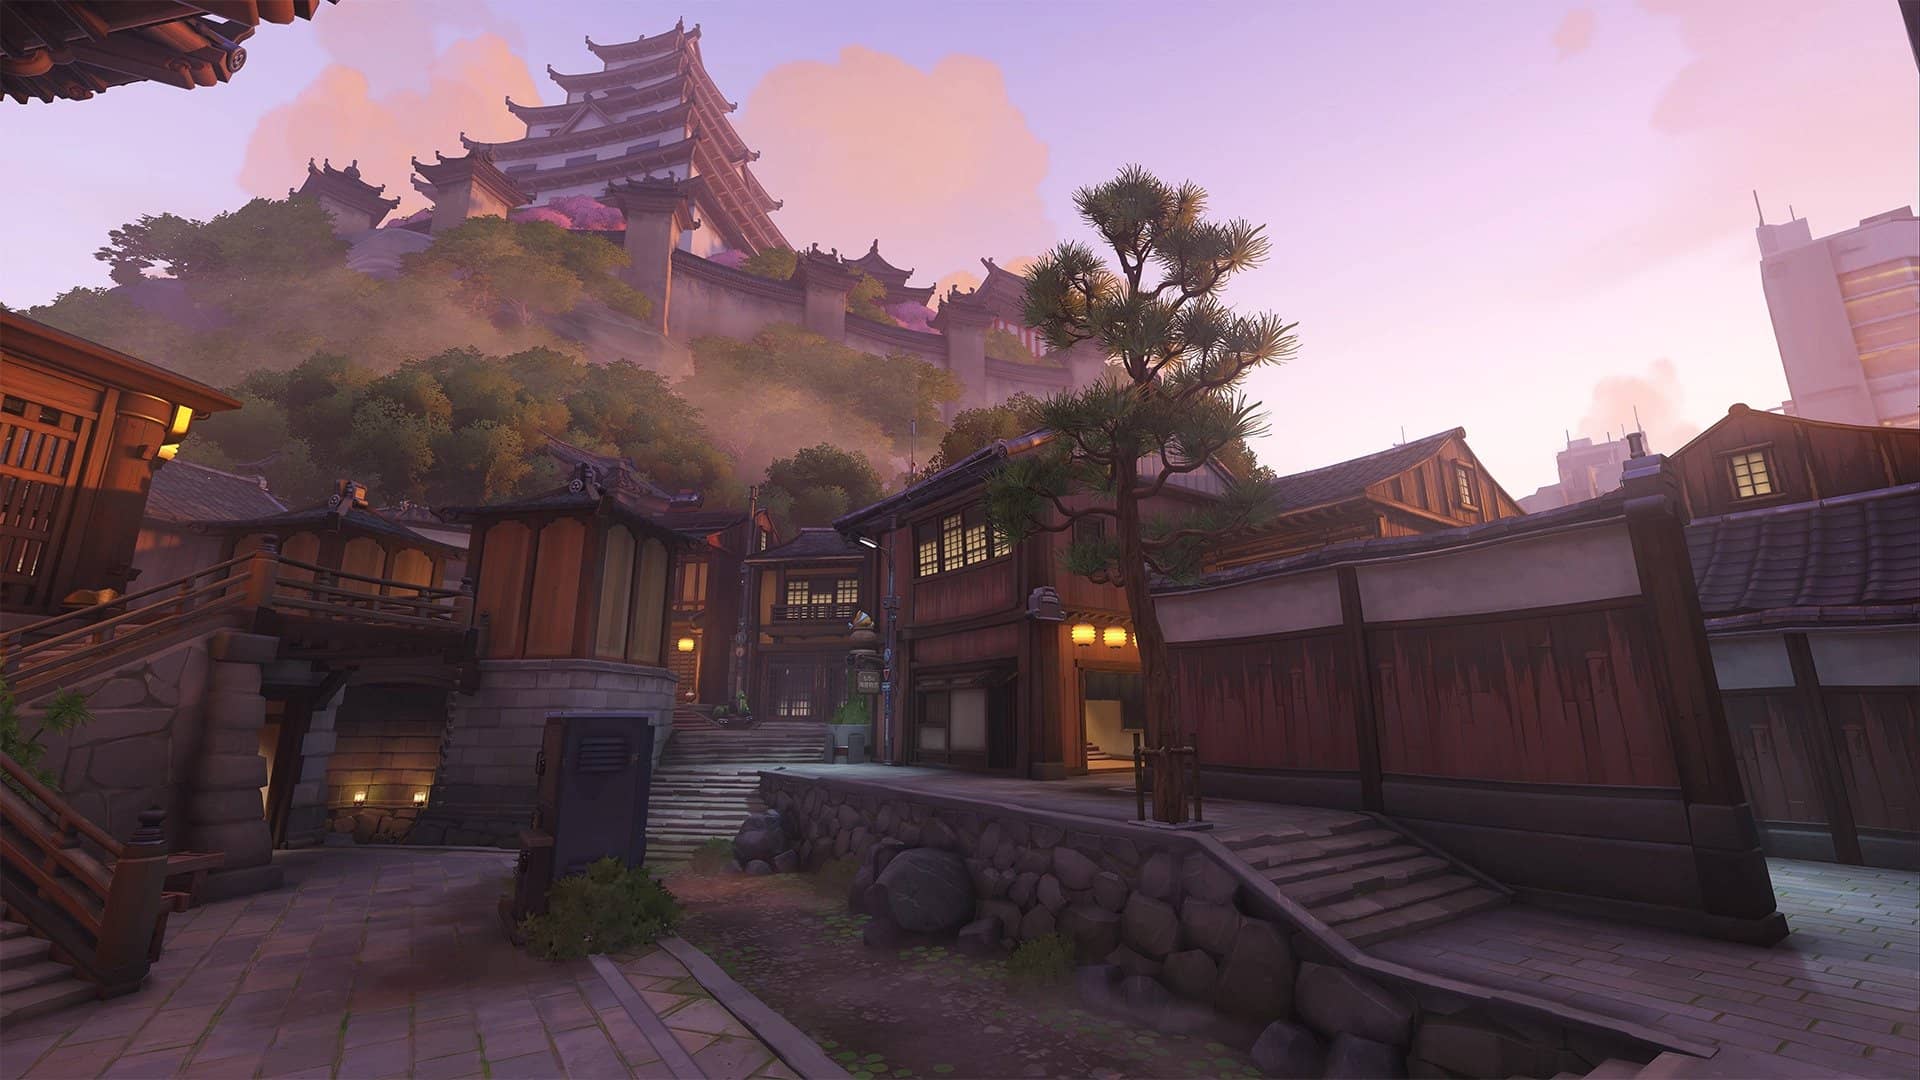 When is the Lunar New Year event in Overwatch 2?